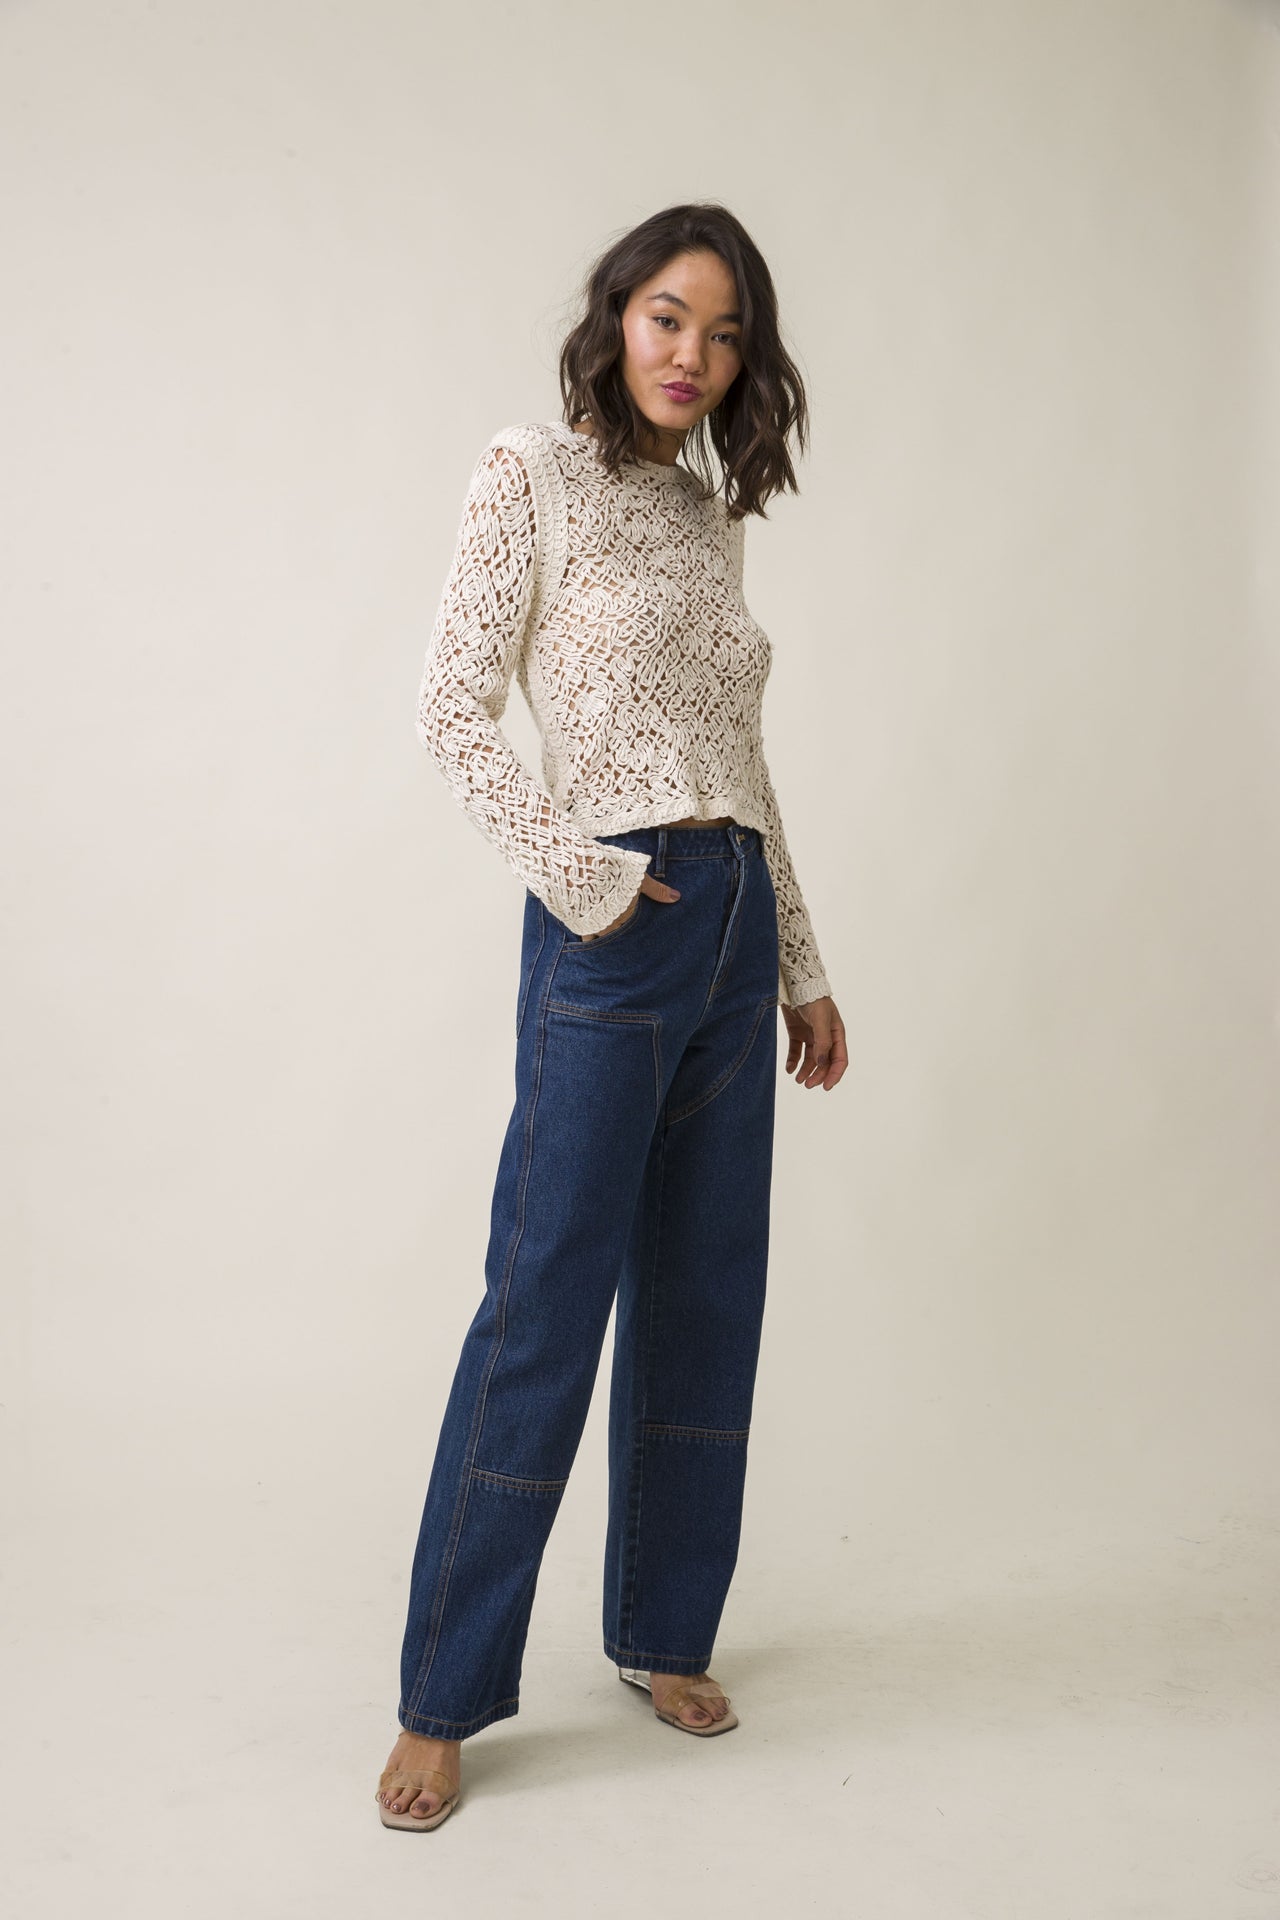 Klara Net Crew, Sweater by Line and Dot | LIT Boutique